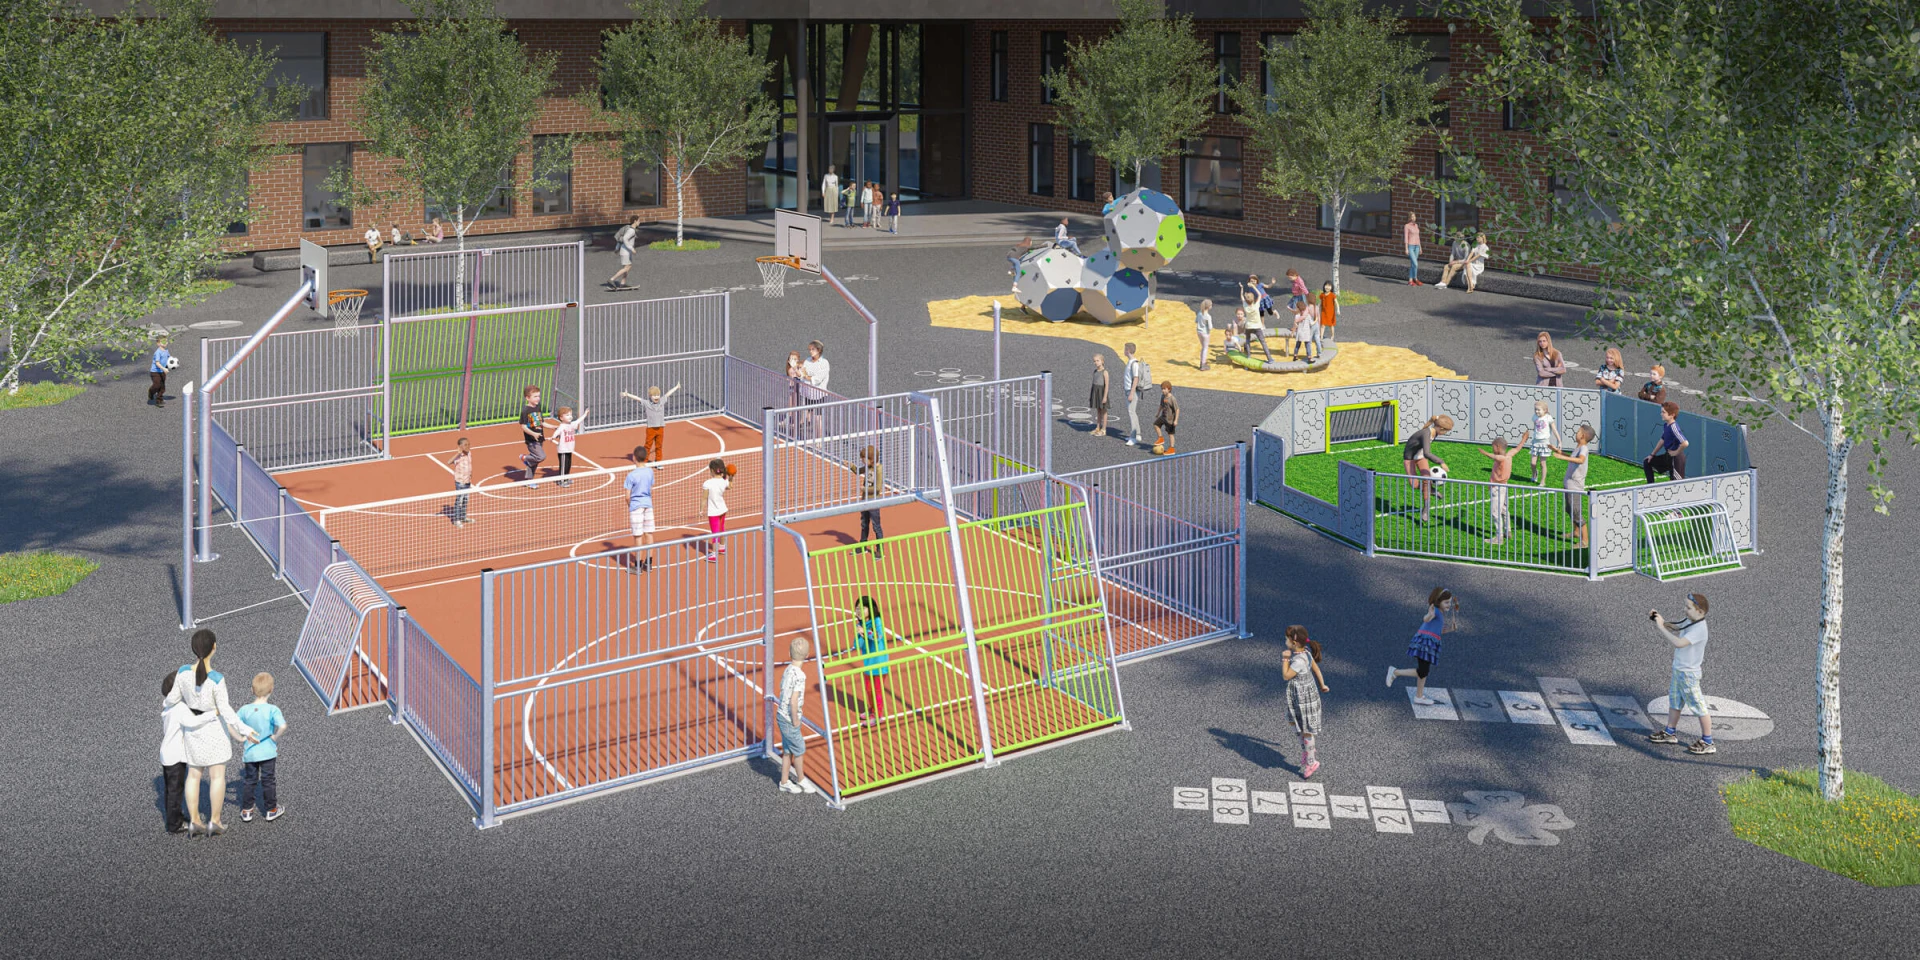 Design idea of a schoolyard with multi ball games areas